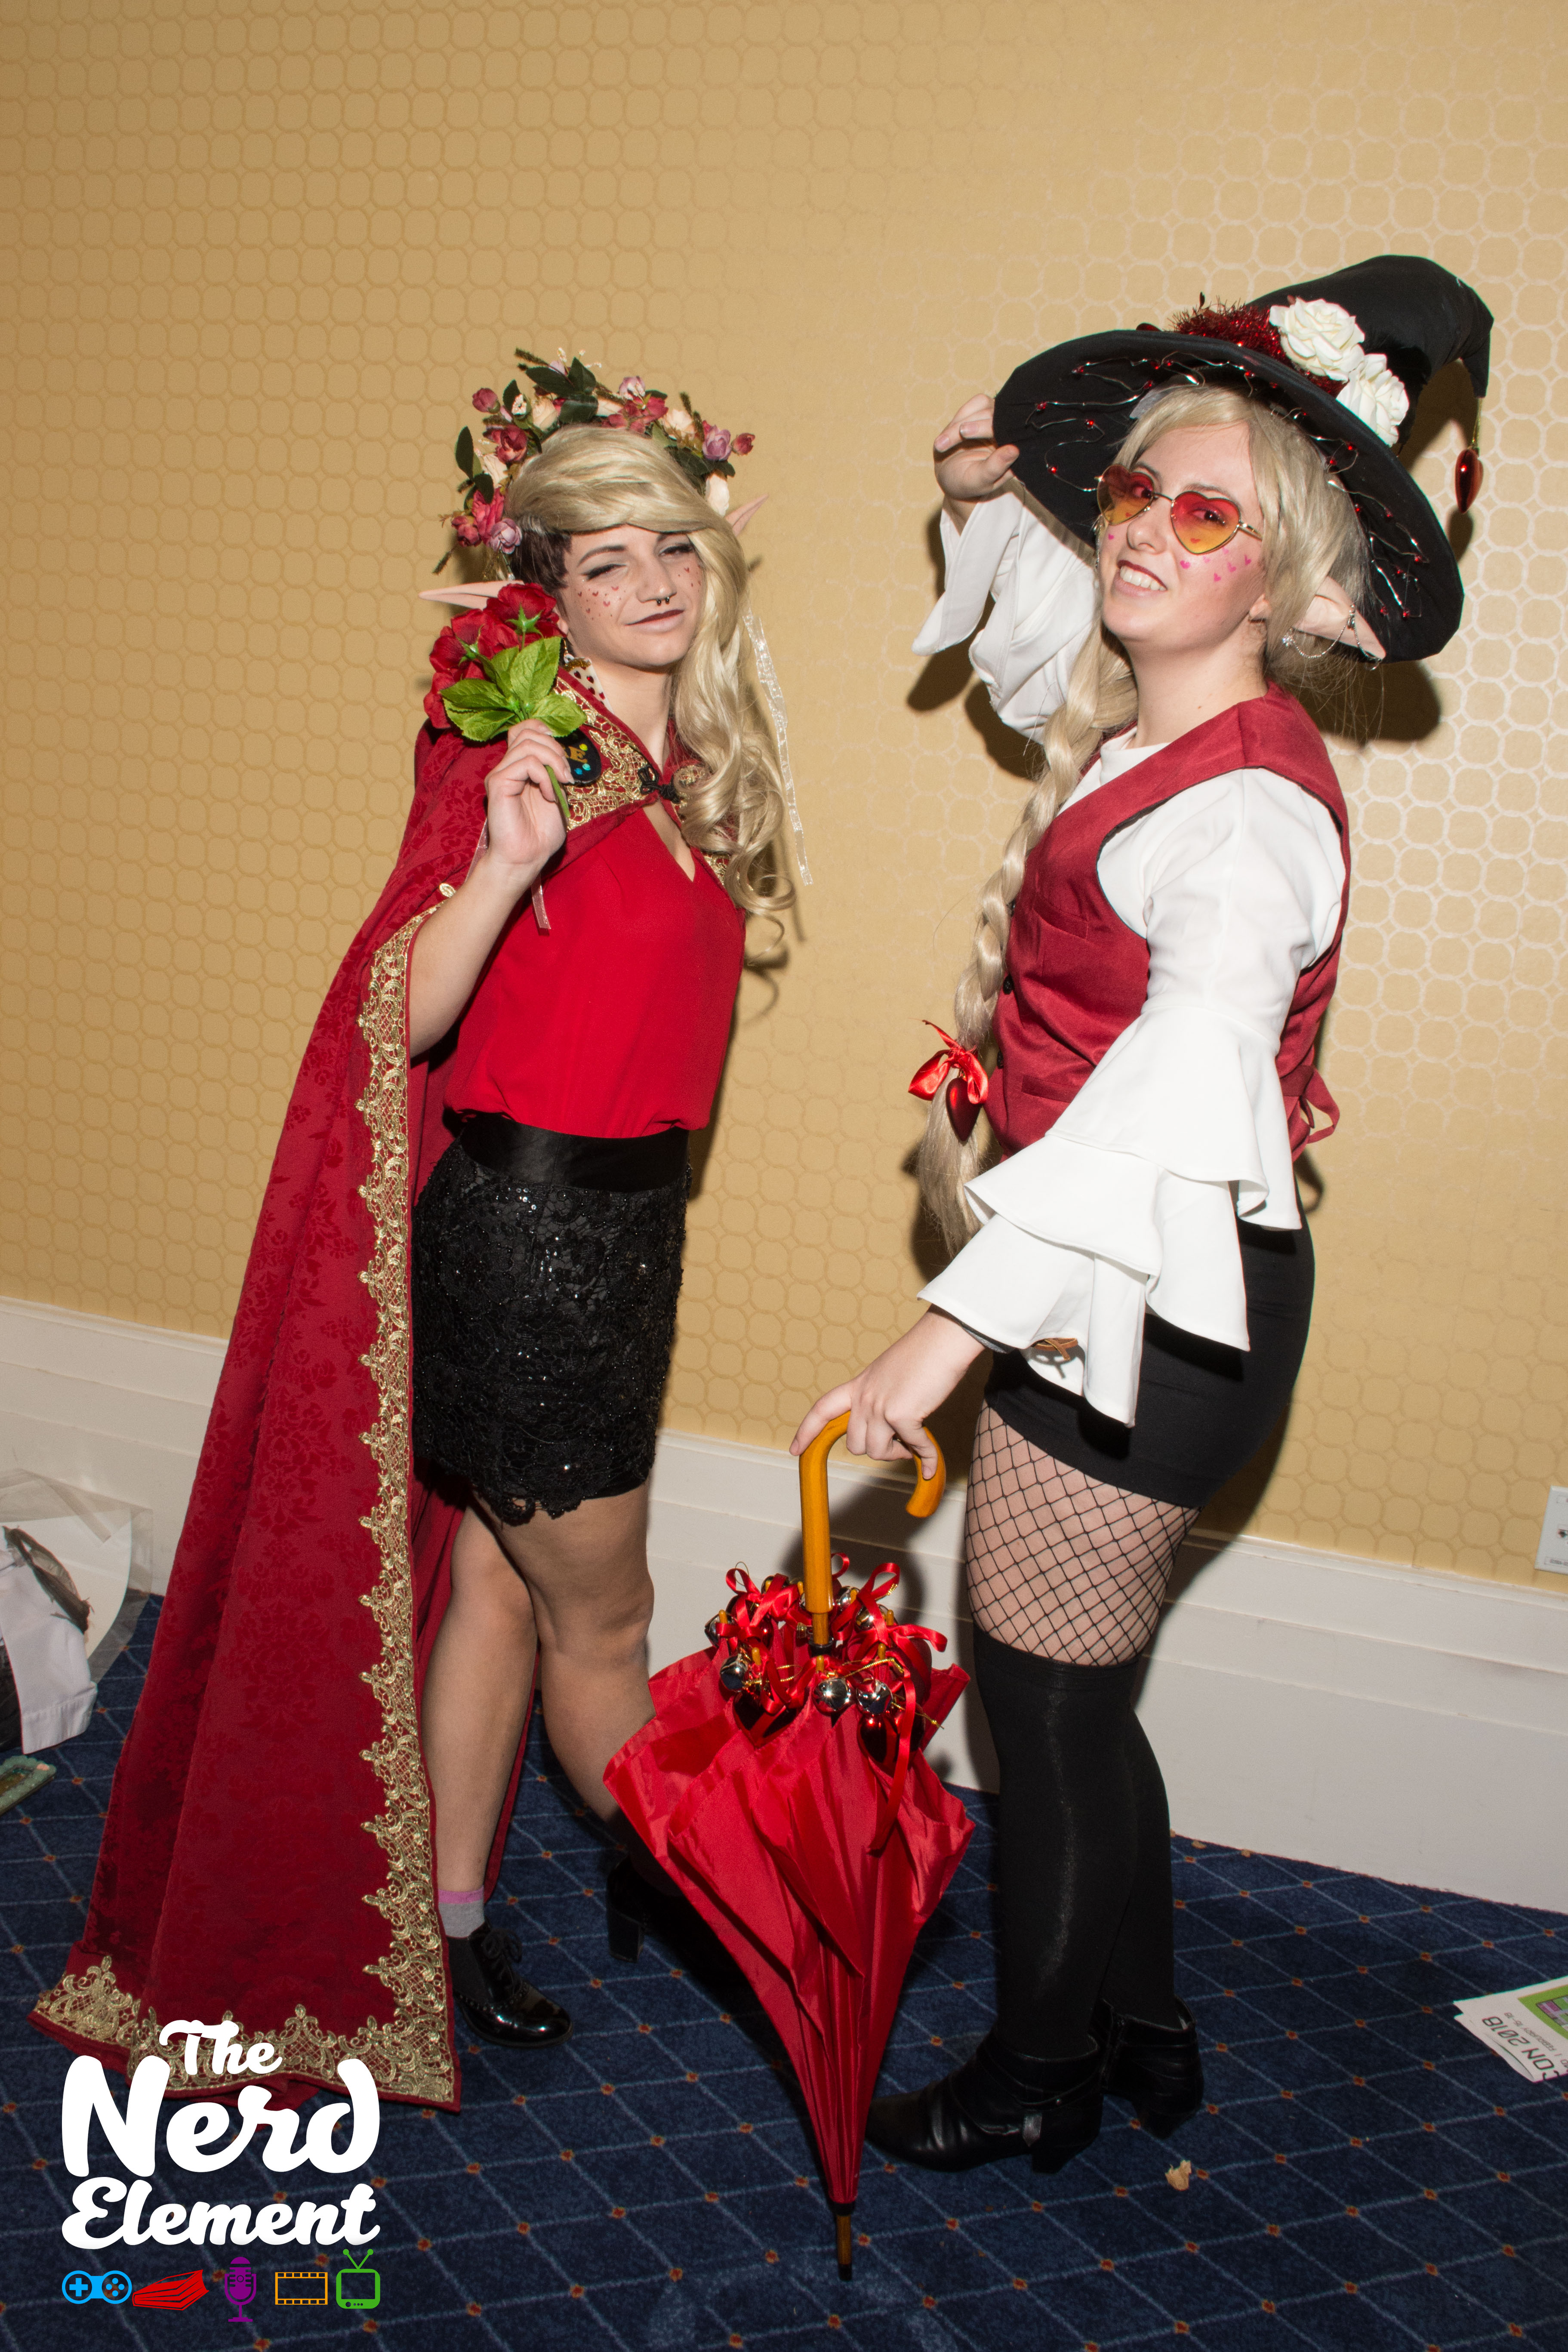 Taako & Lup - The Adventure Zone [podcast]

Cosplayers: @the_sparrows_providence and @voidfish_taakos